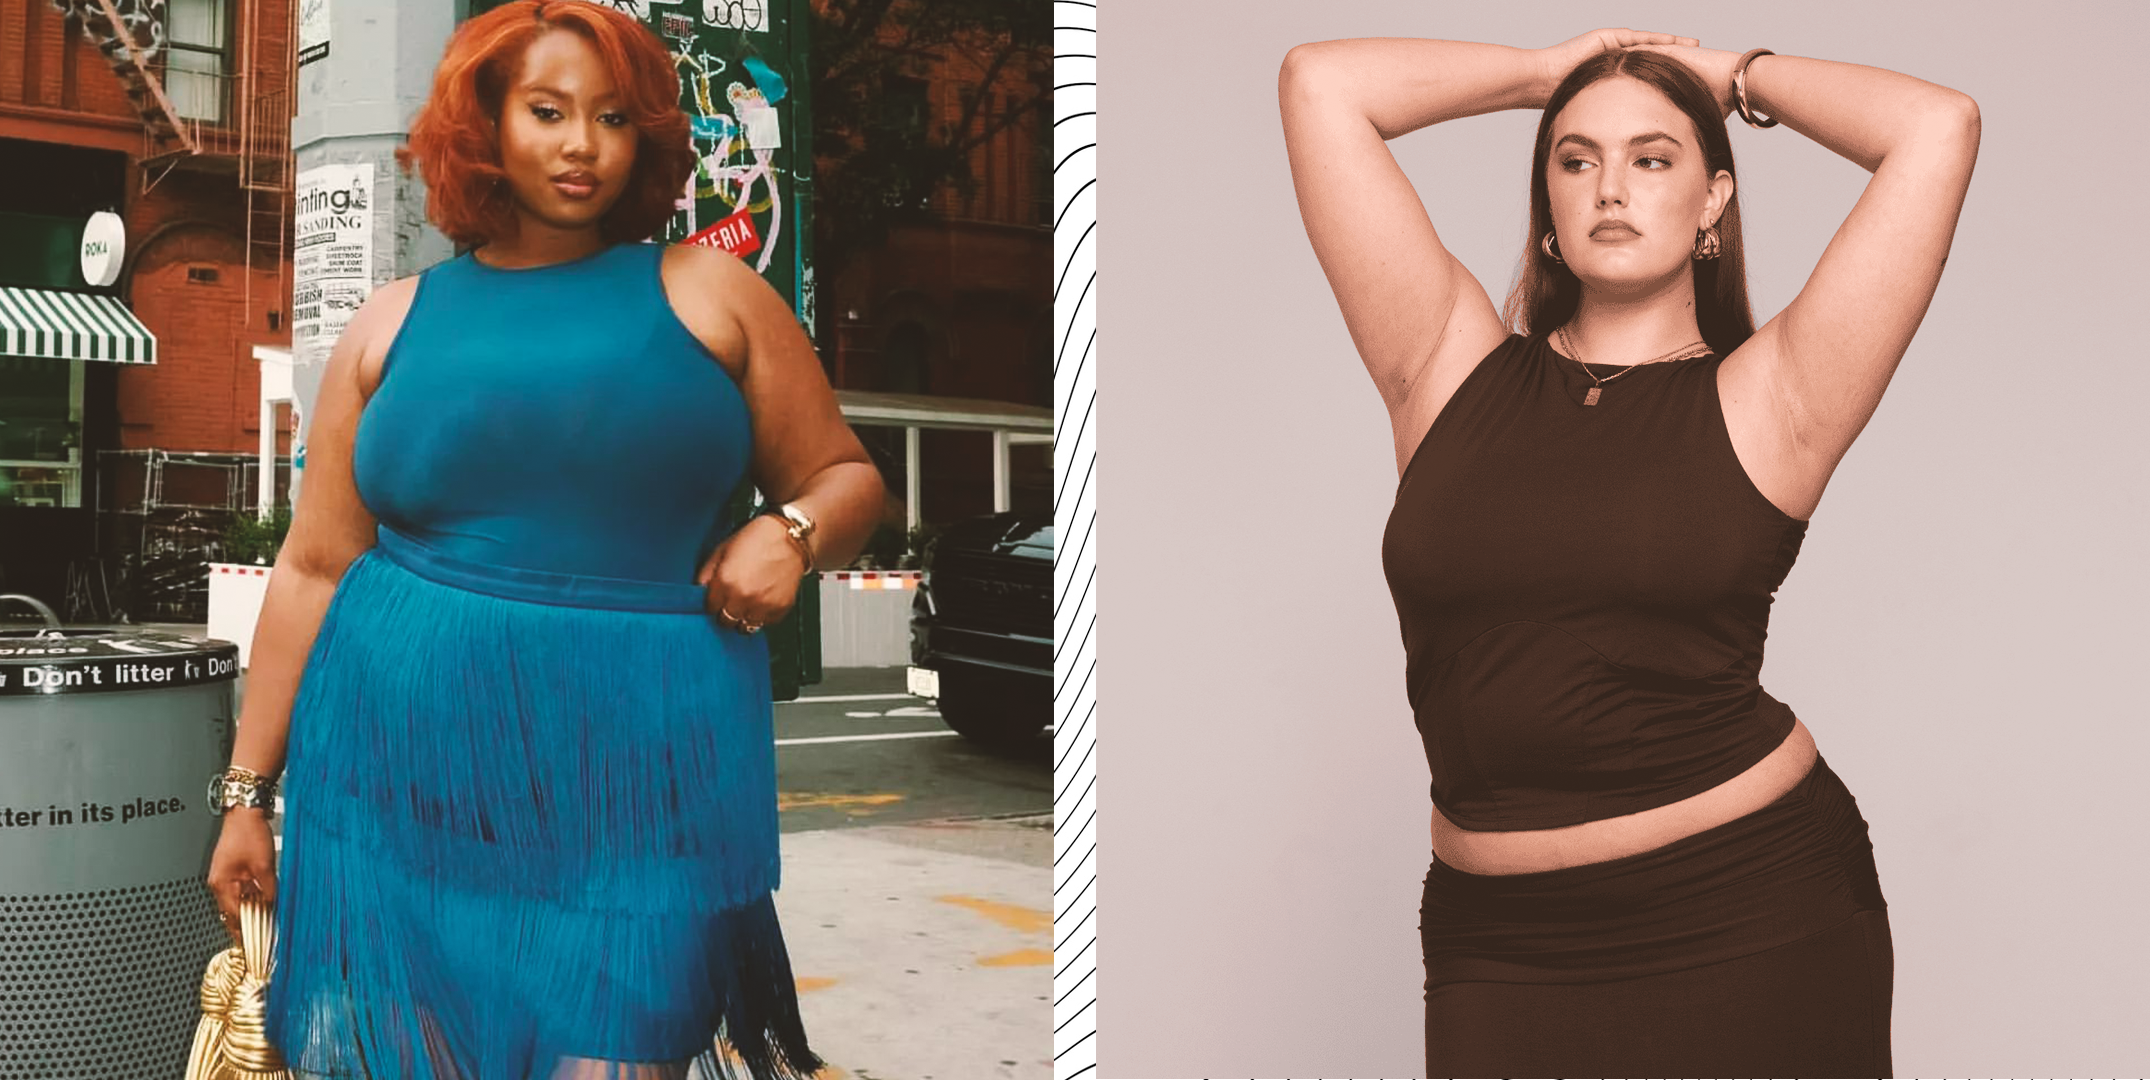 New Plus-Size Models Taking the Industry by Storm